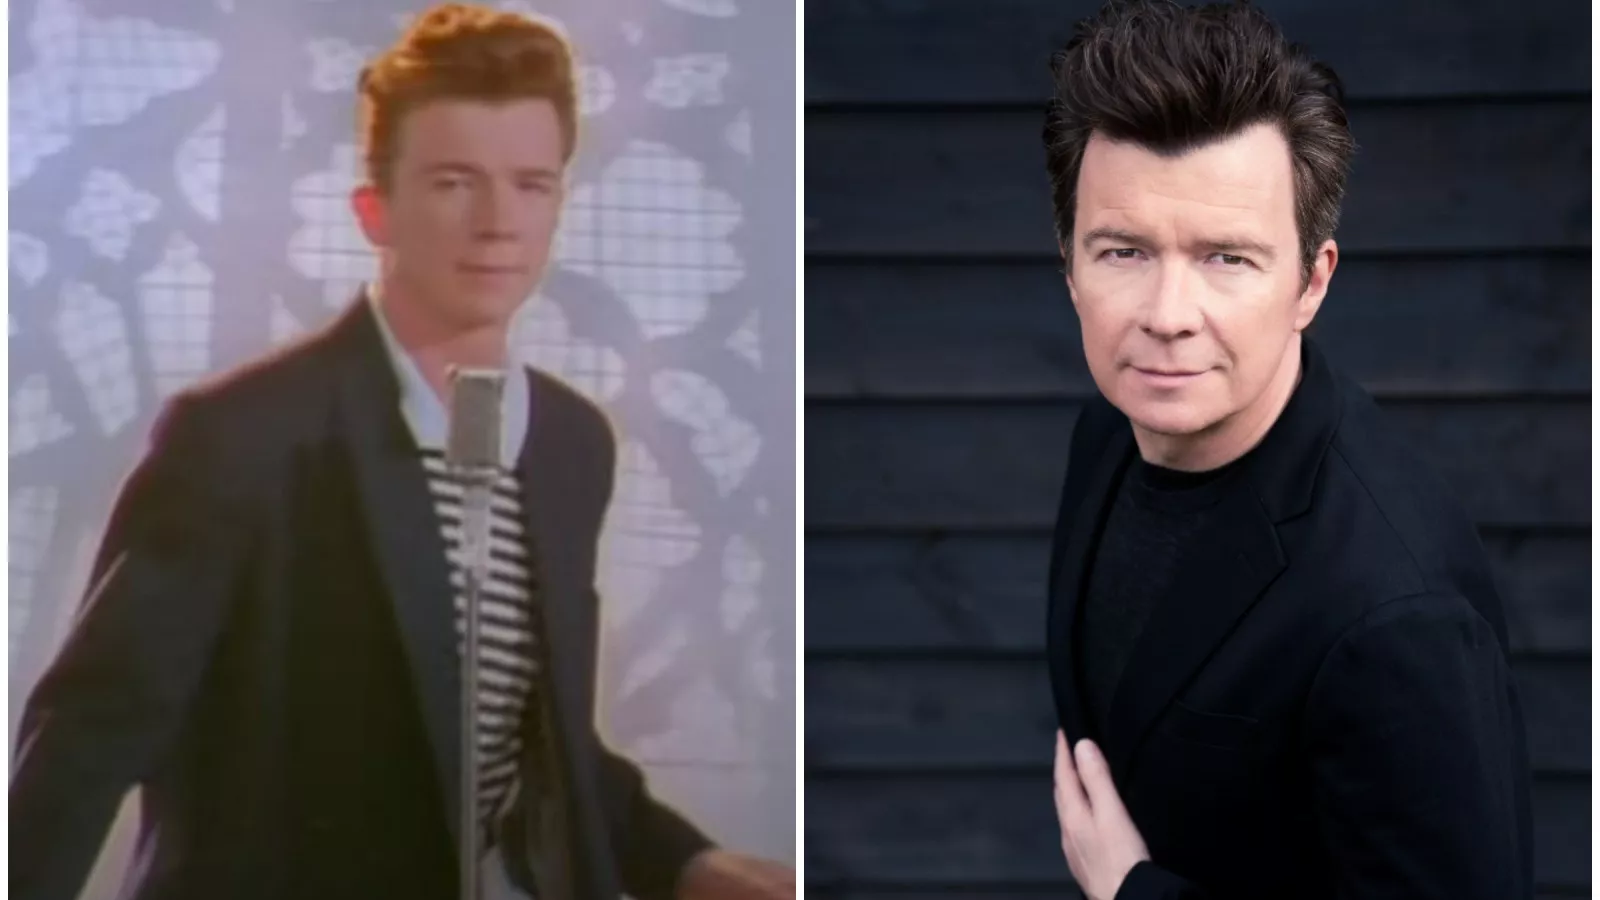 The origins of the 'Rick Roll': Rick Astley on his role as an